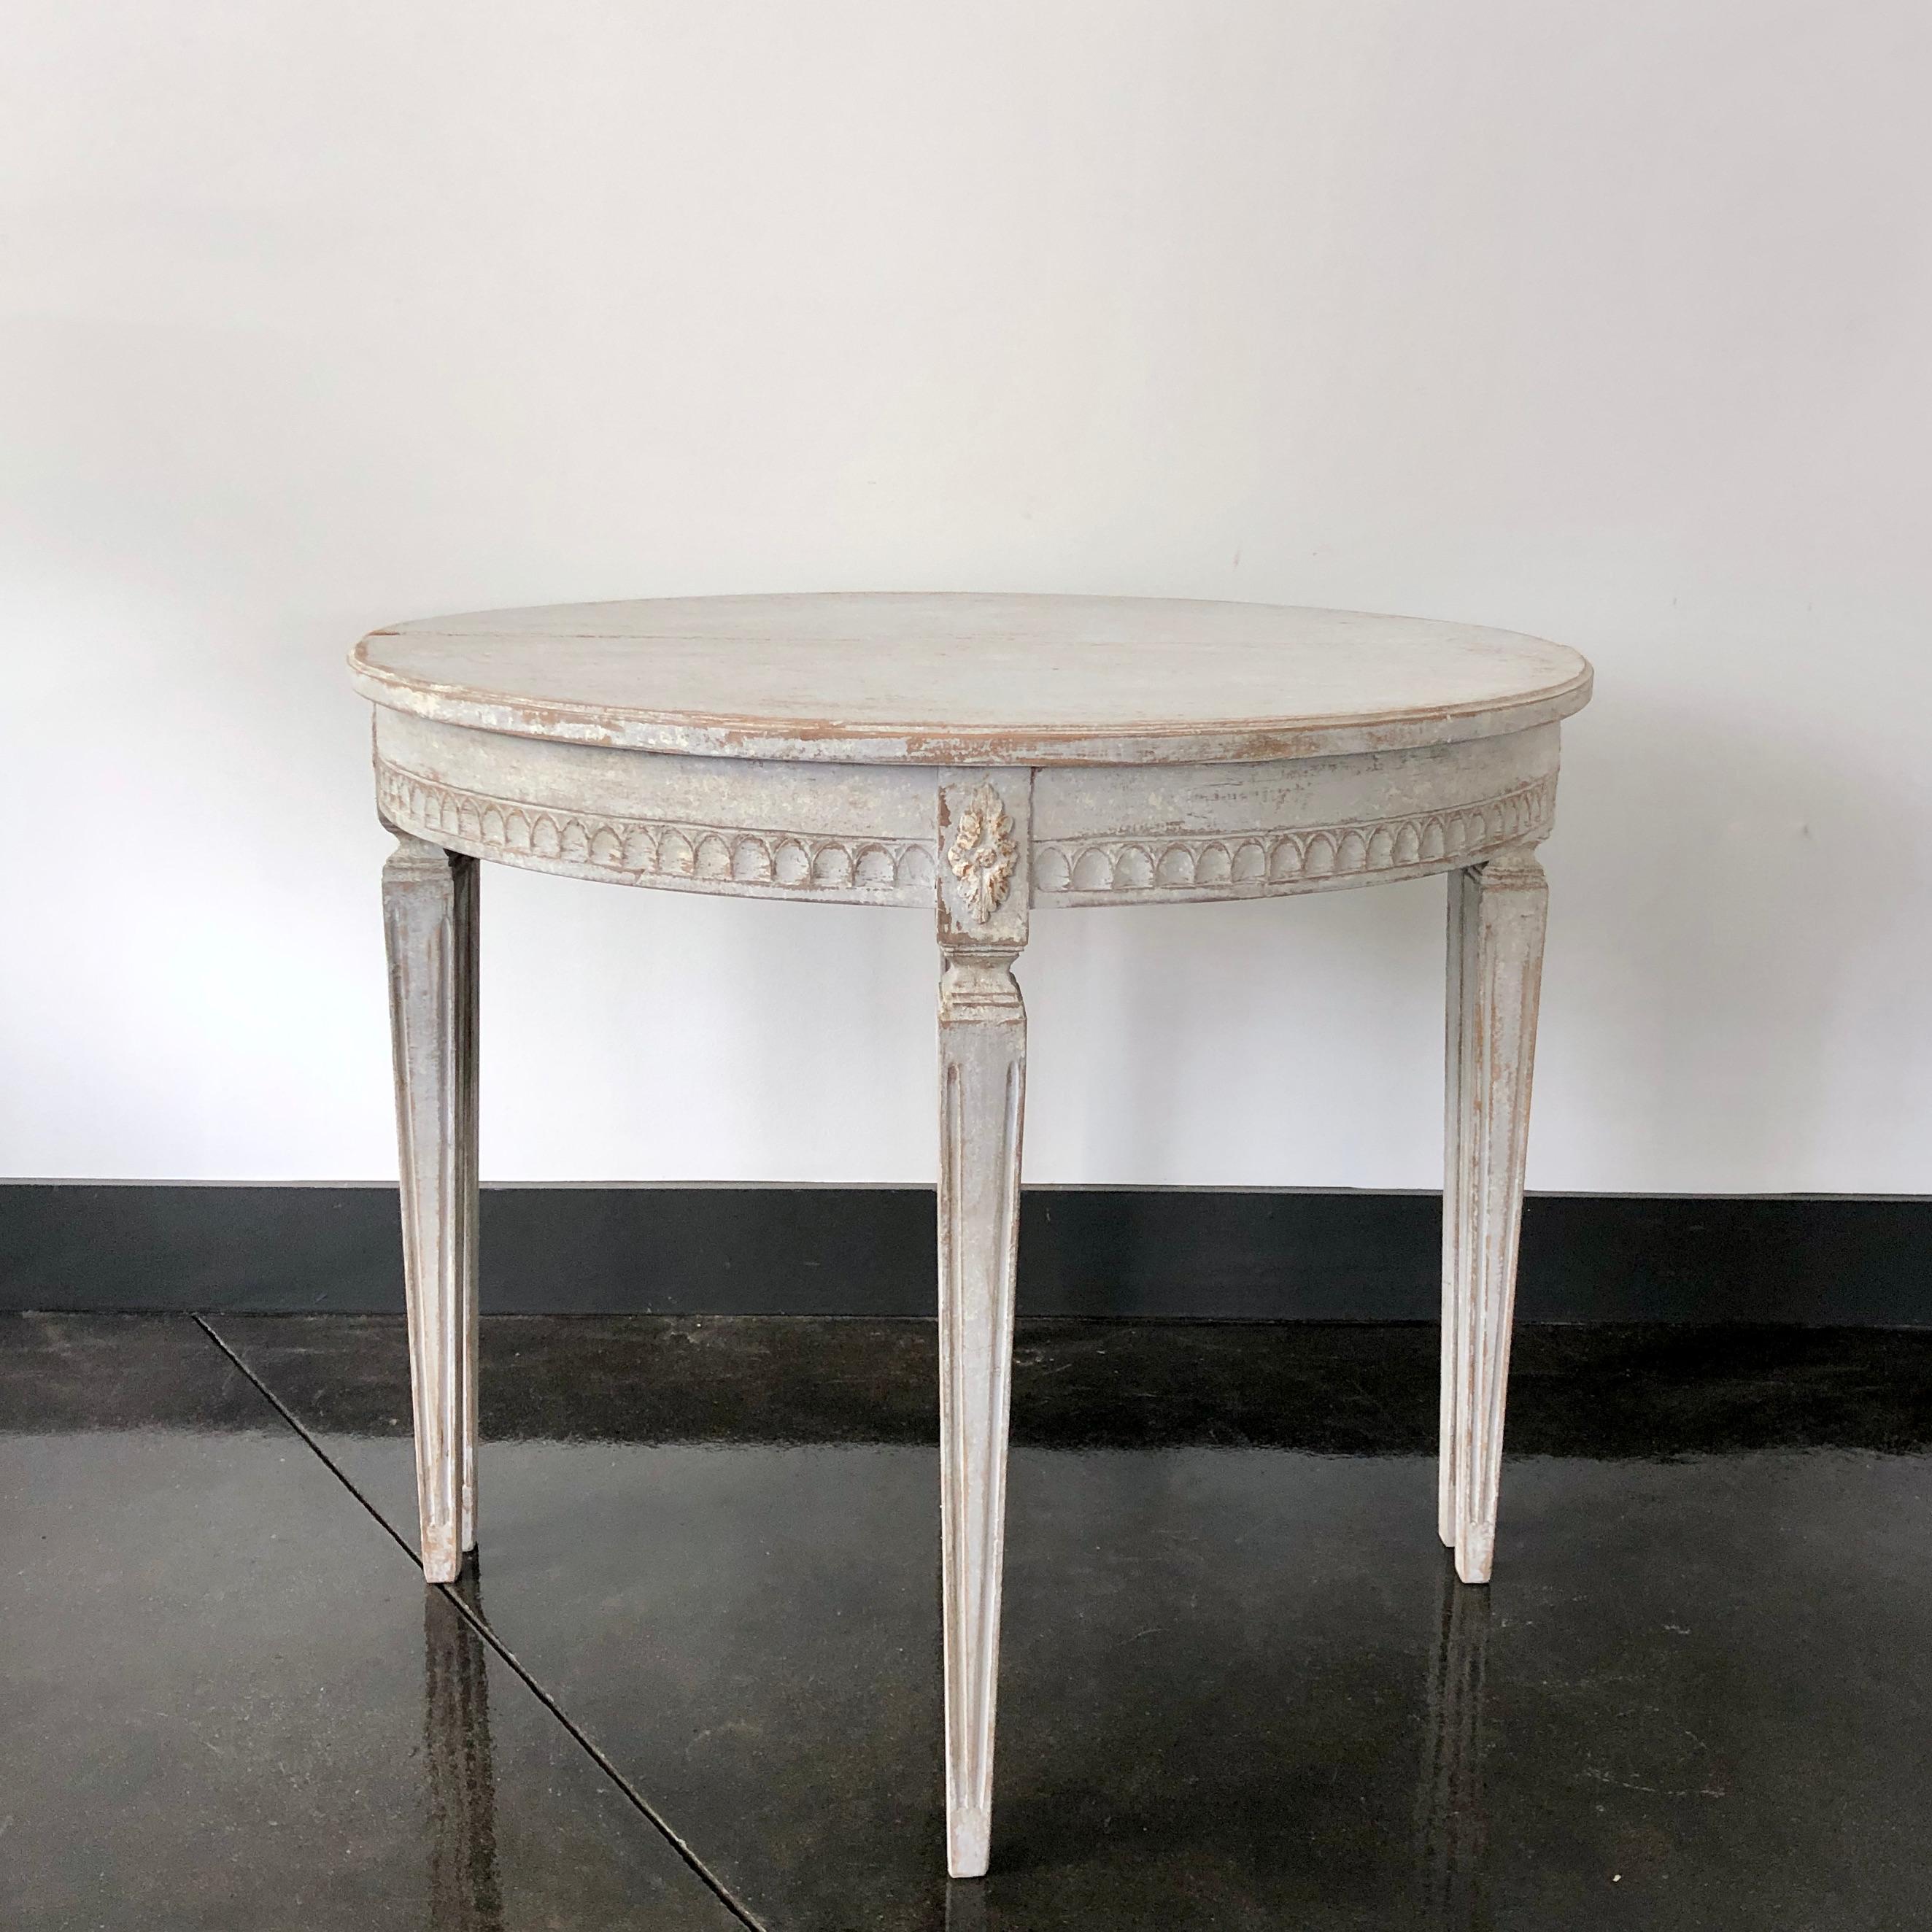 19th Century Pair of Period Gustavian Demilune Console Tables